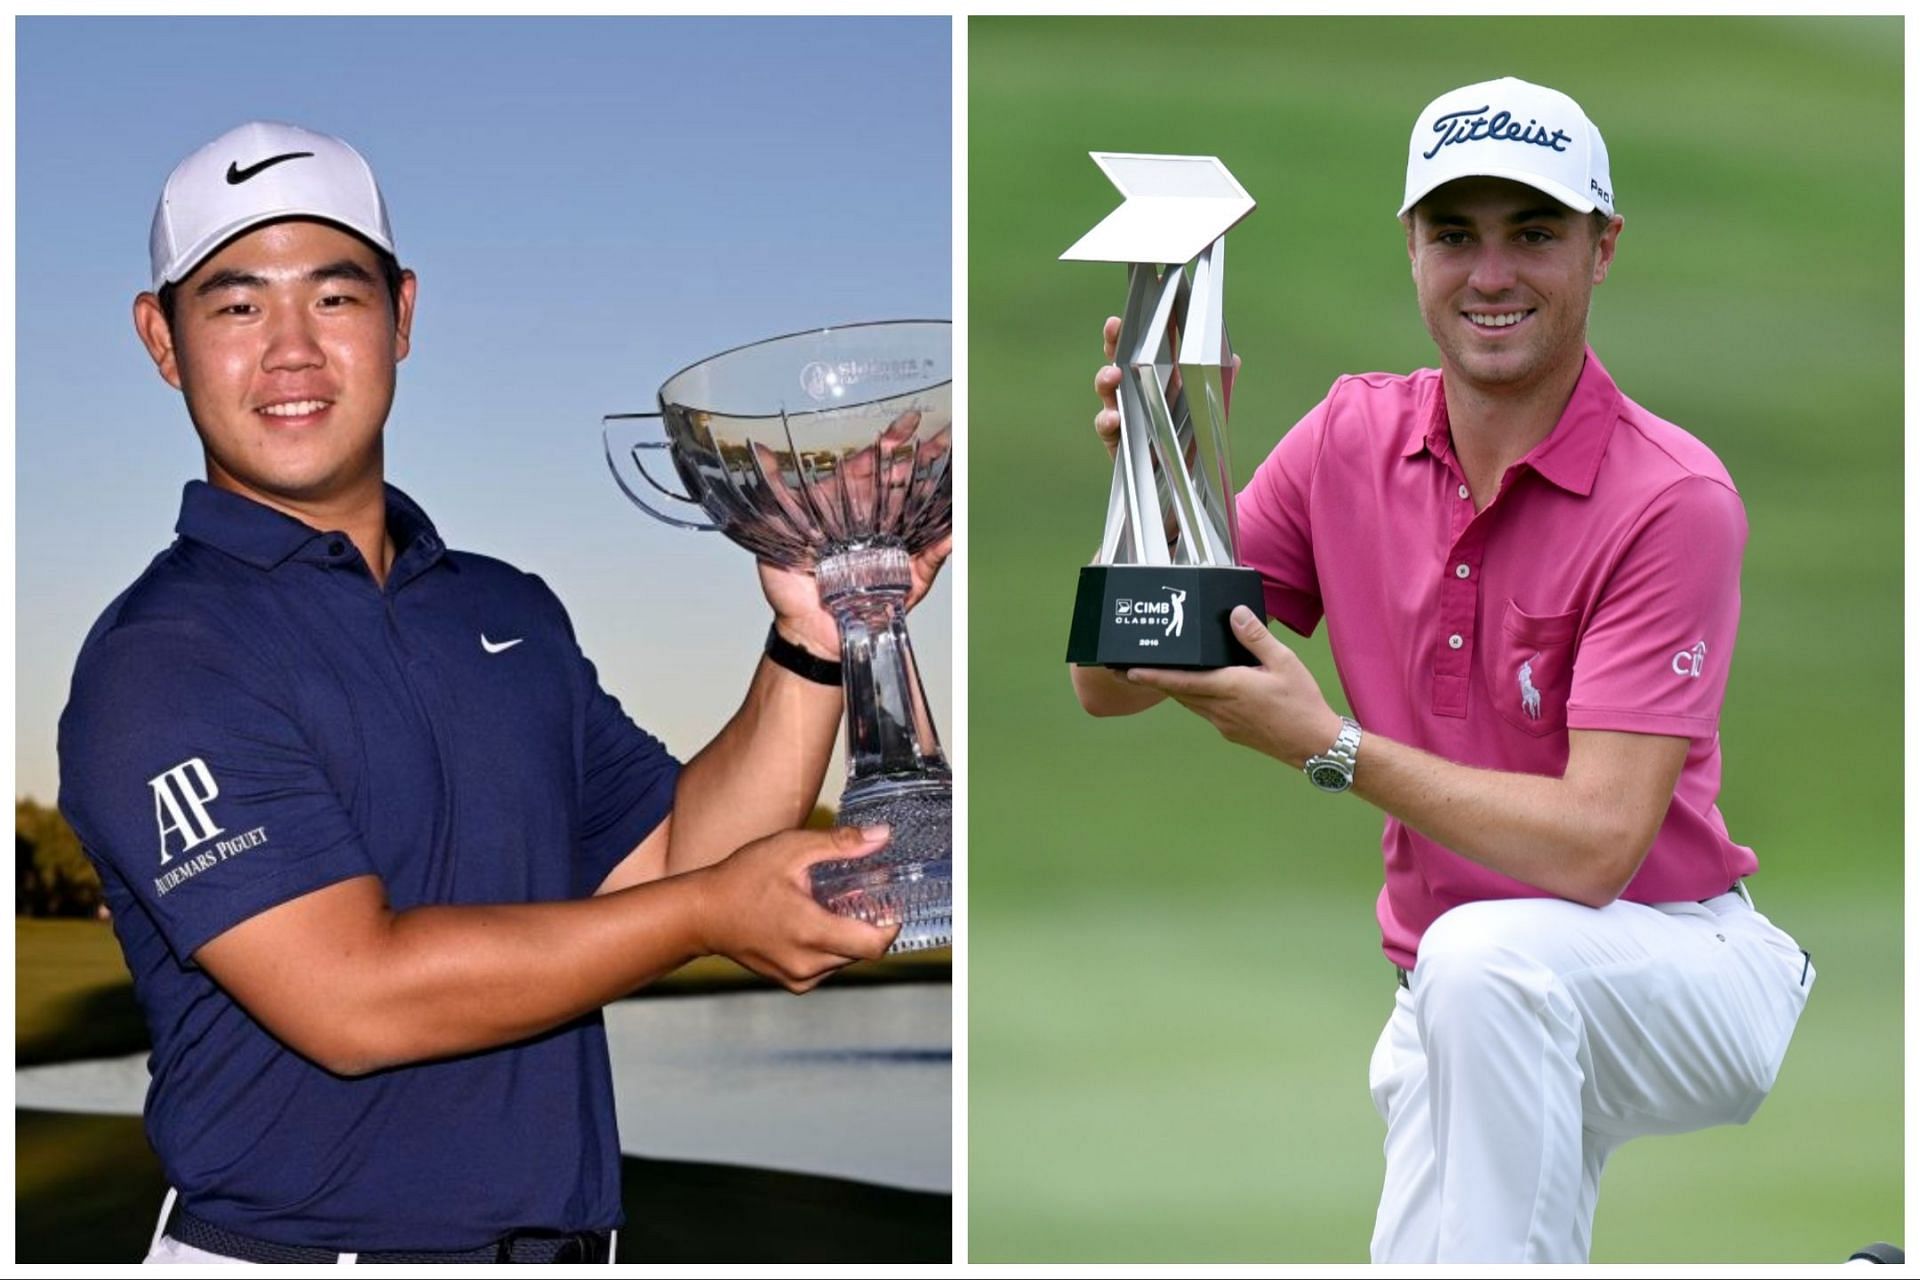 Tom Kim and Justin Thomas are two of the youngest golfers to defend their titles